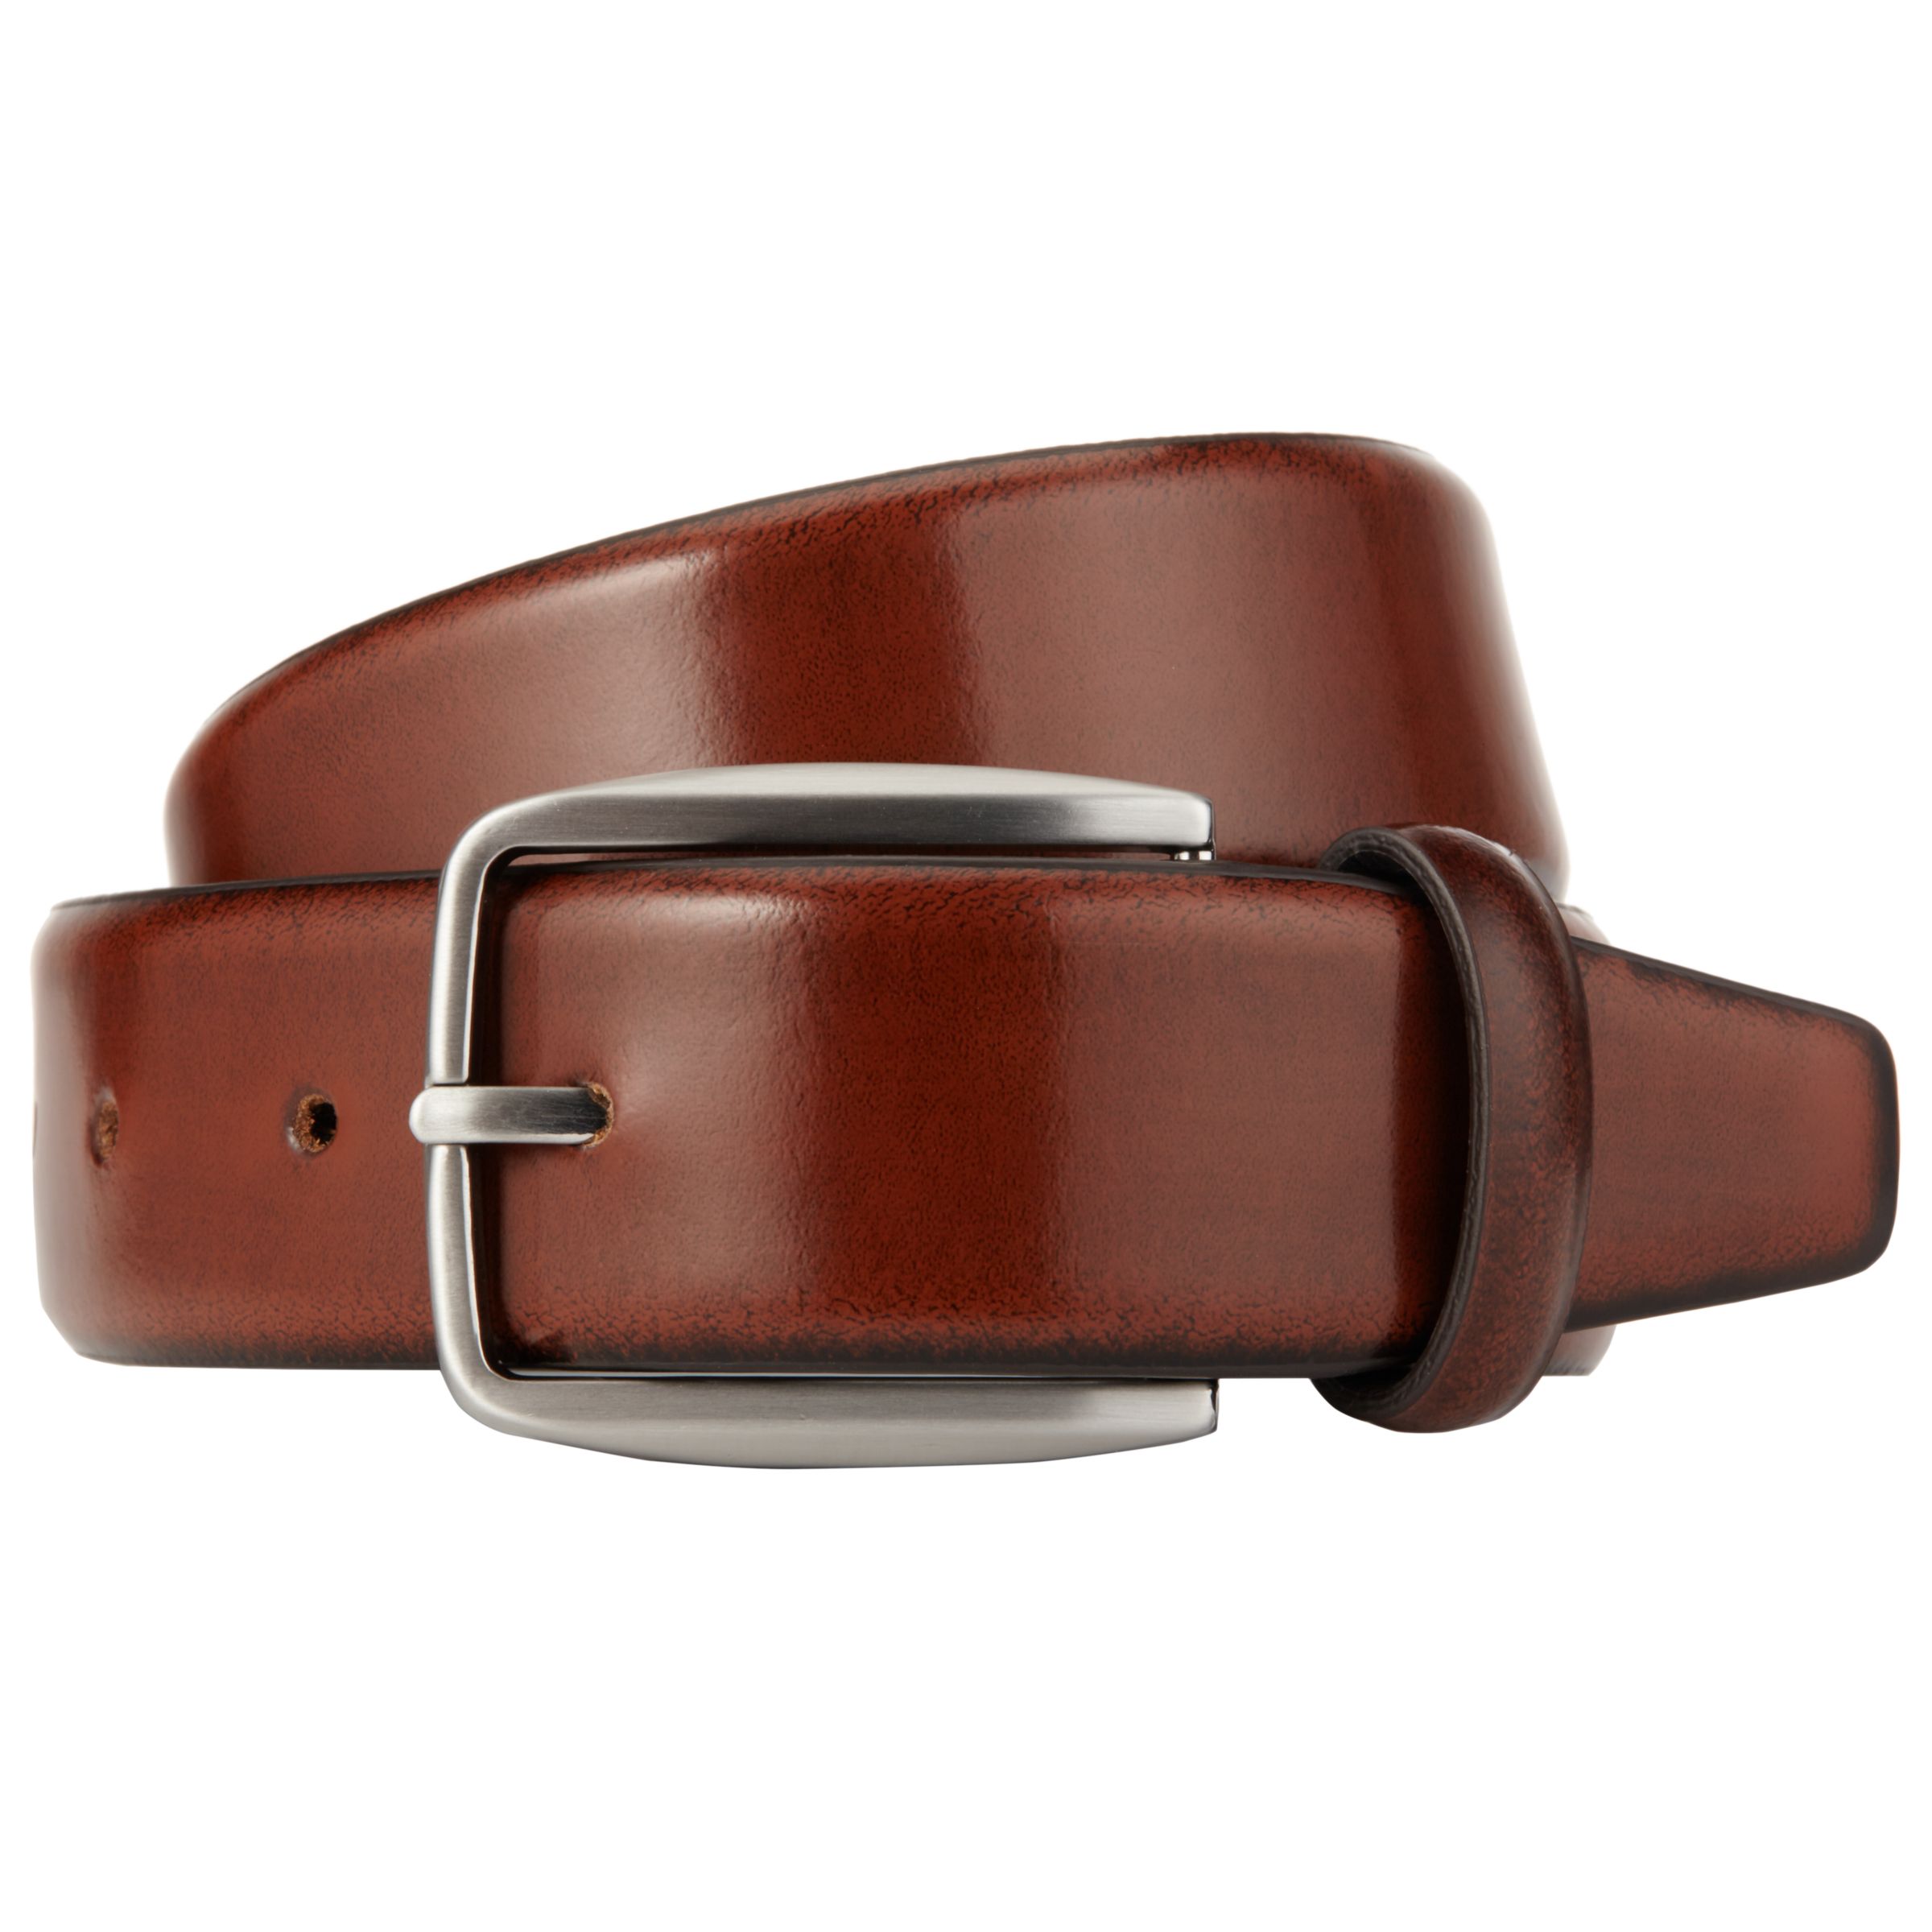 John Lewis & Partners Made in Italy Burnished Leather Belt, Tan